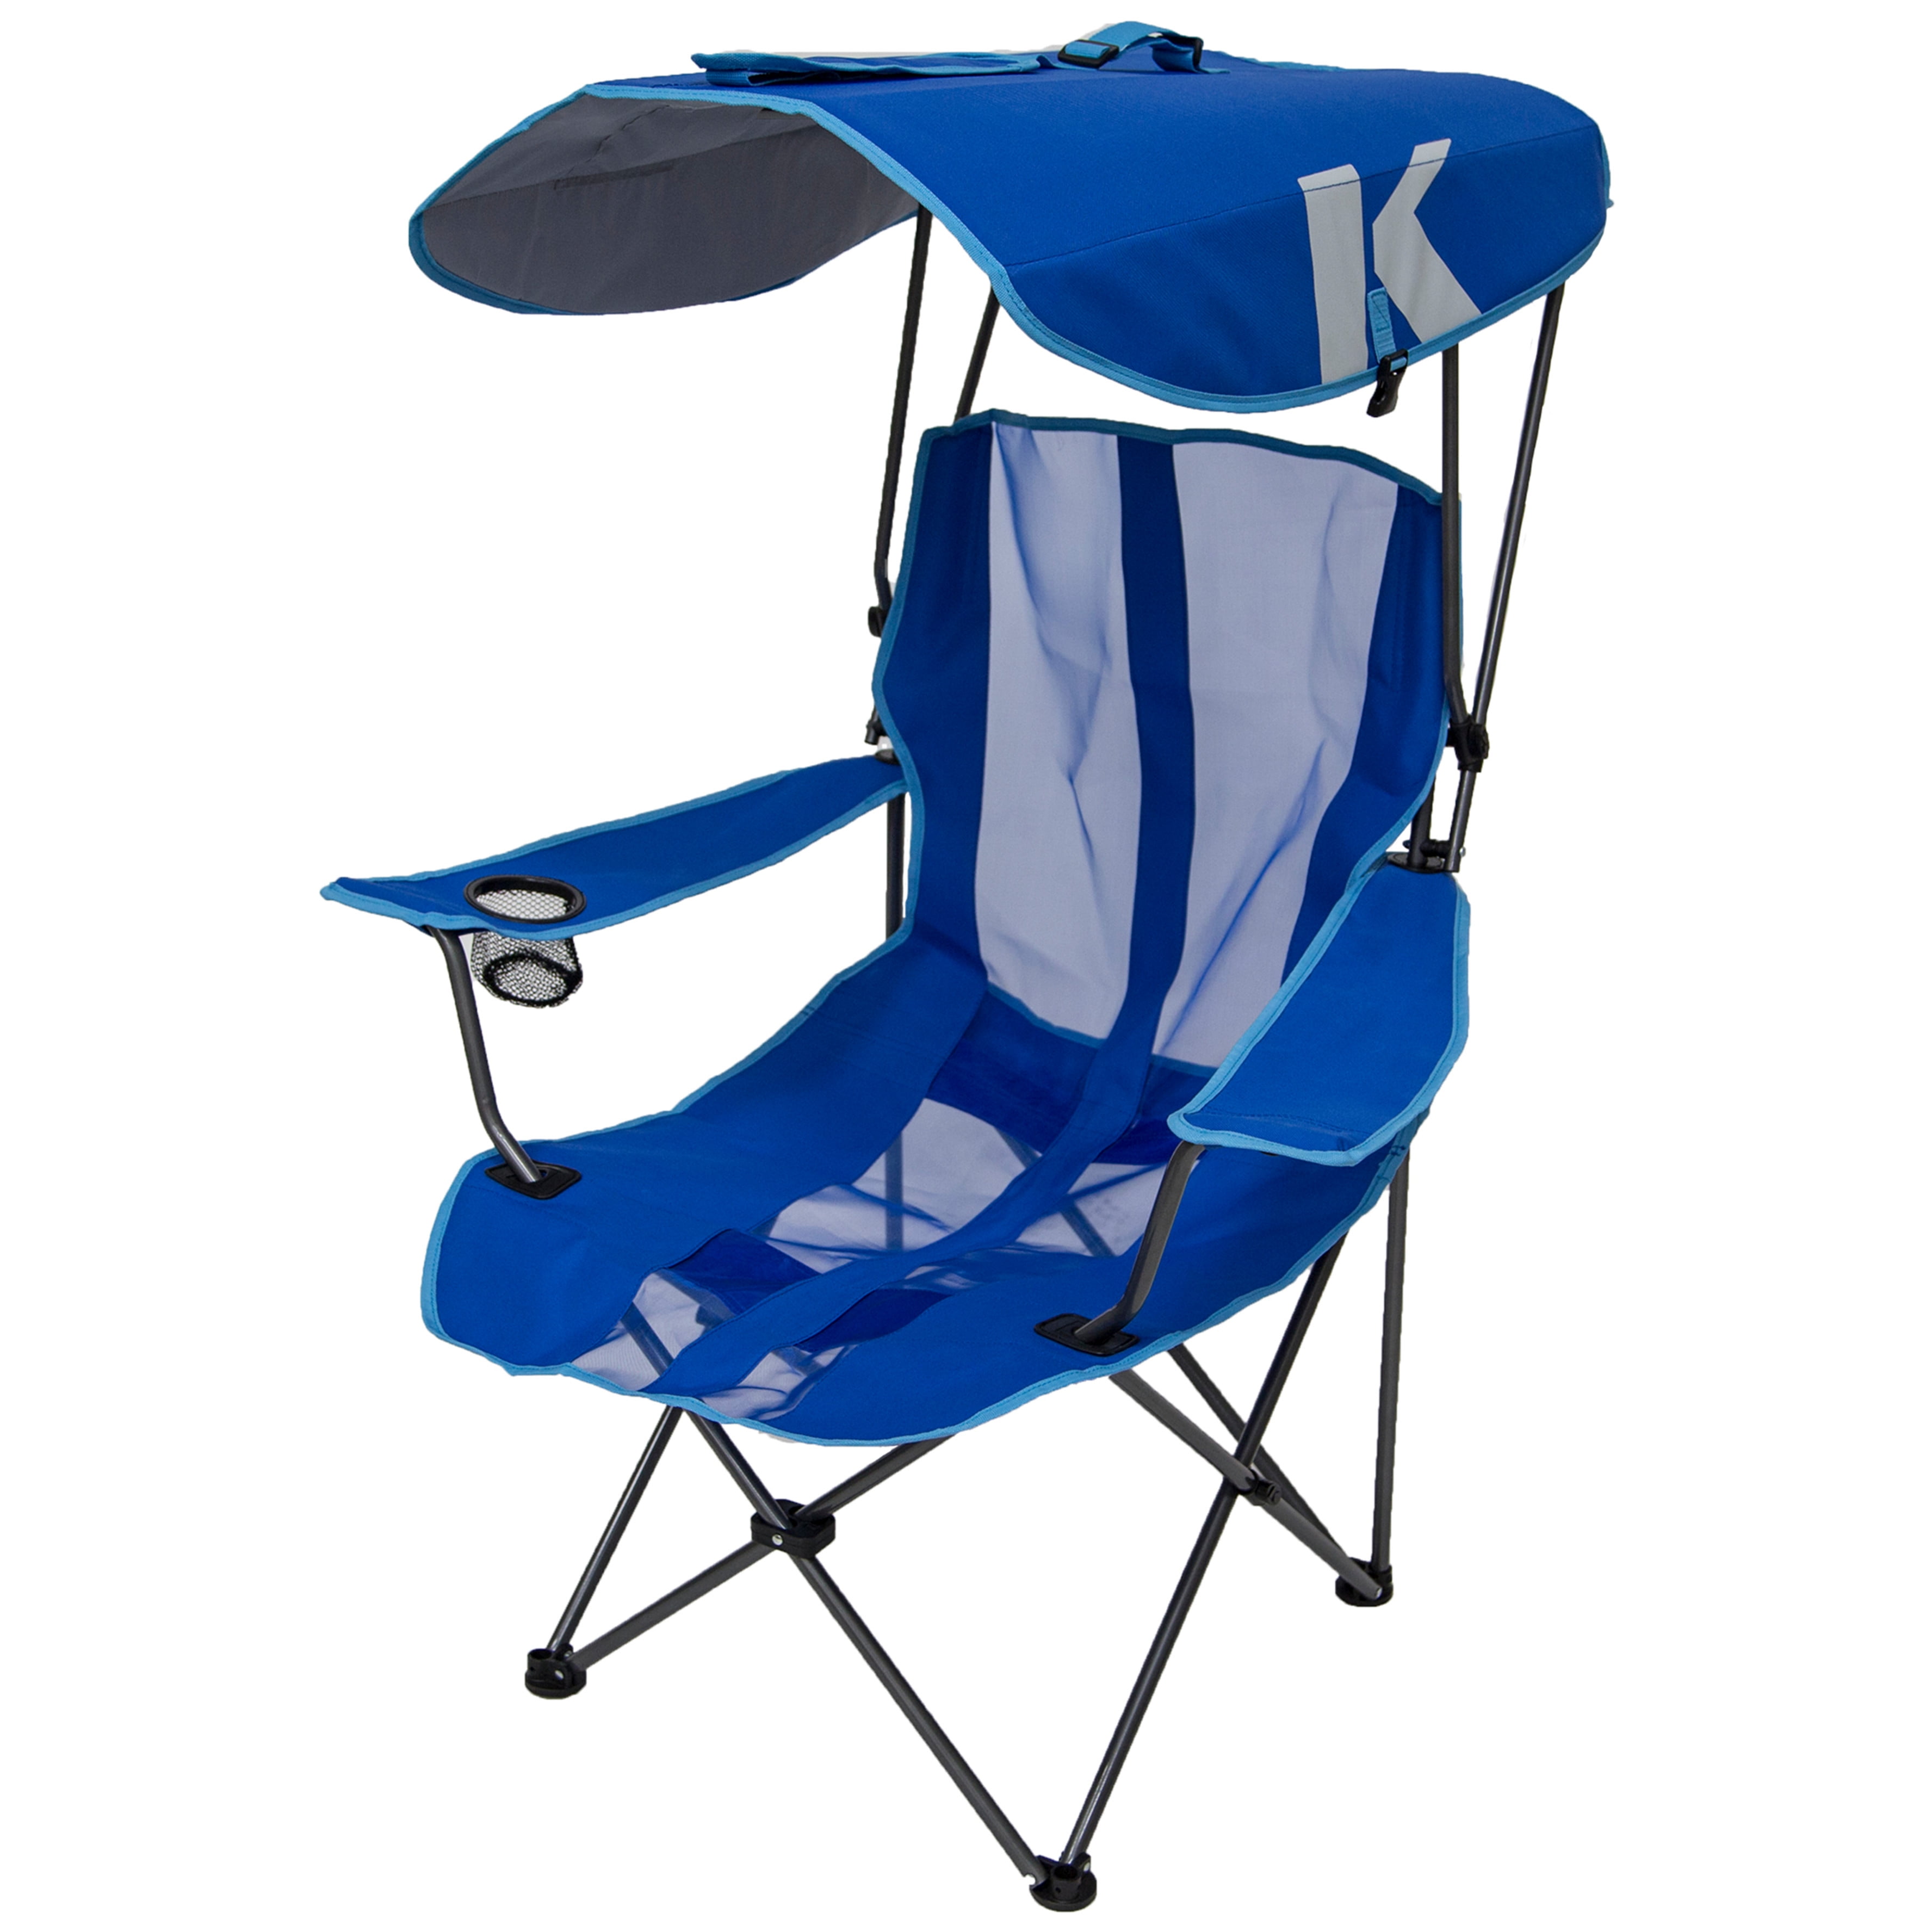 Kamp-Rite CC463 Outdoor Tailgating Camping Sun Shade Canopy Folding Lawn Chair 